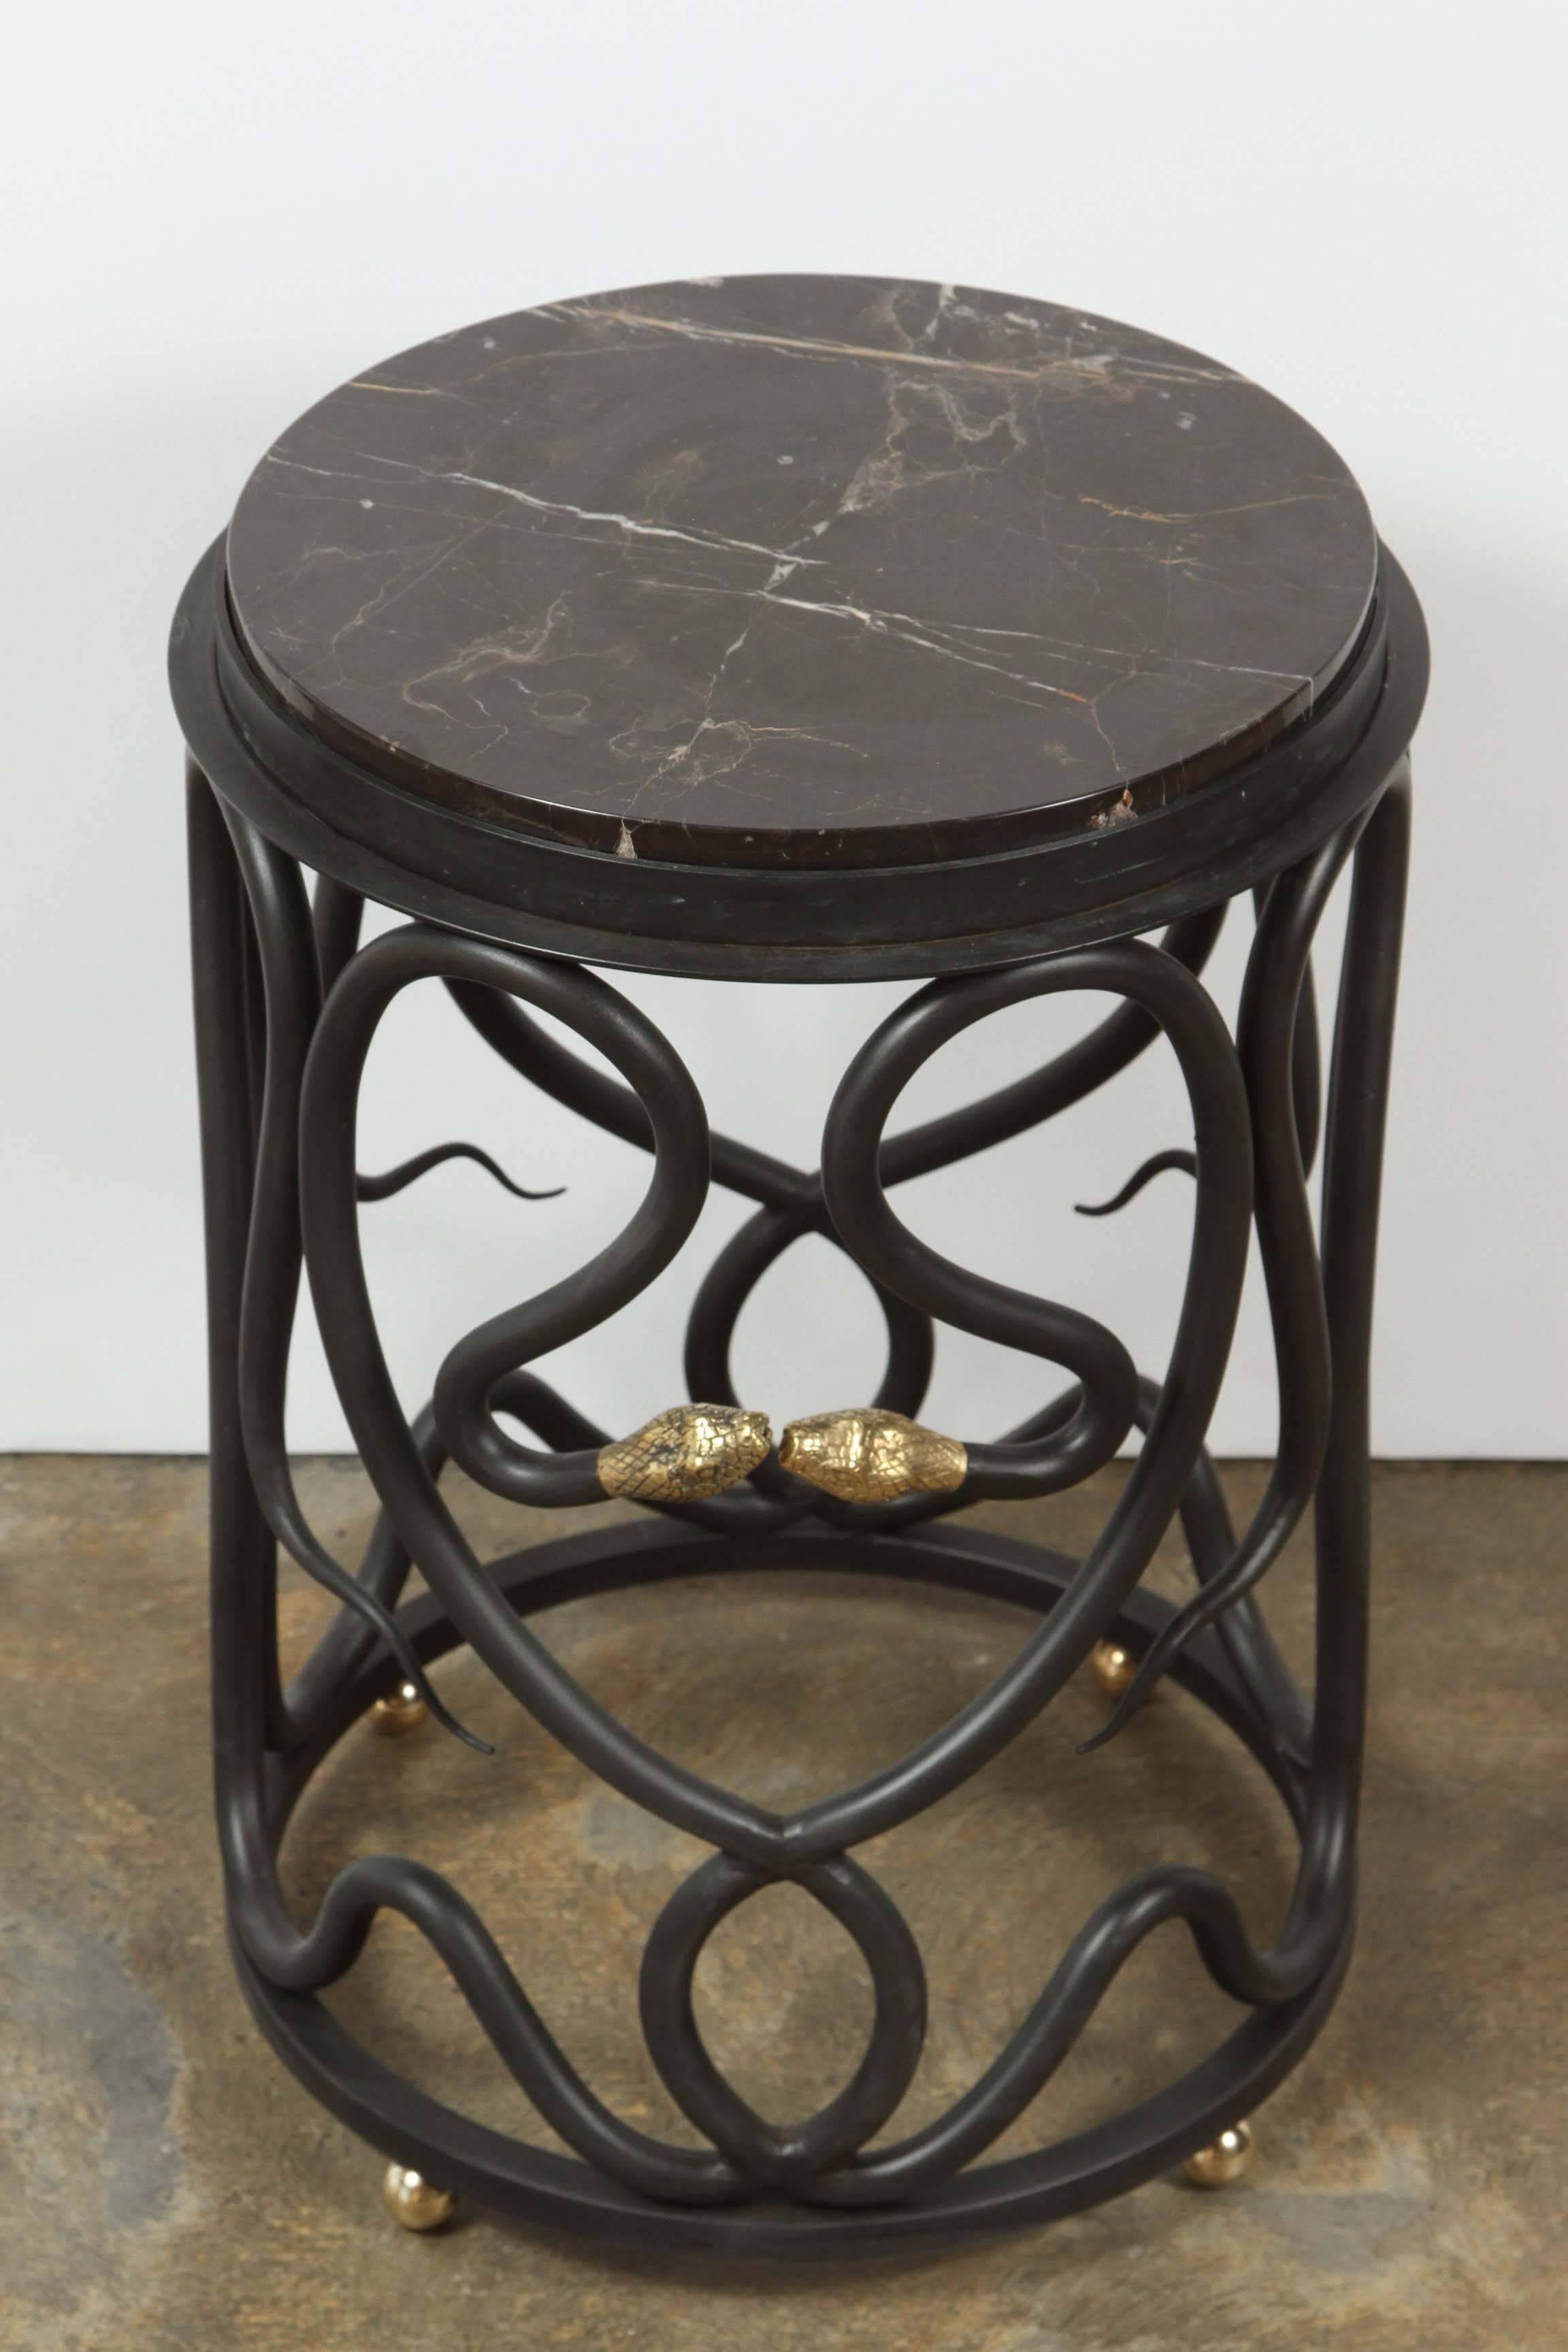 Paul Marra snake table. Steel table in bronze patina with brass snake heads and brass table feet. Polished marble top is Noir St. Laurent. Currently one in stock, price is per table.